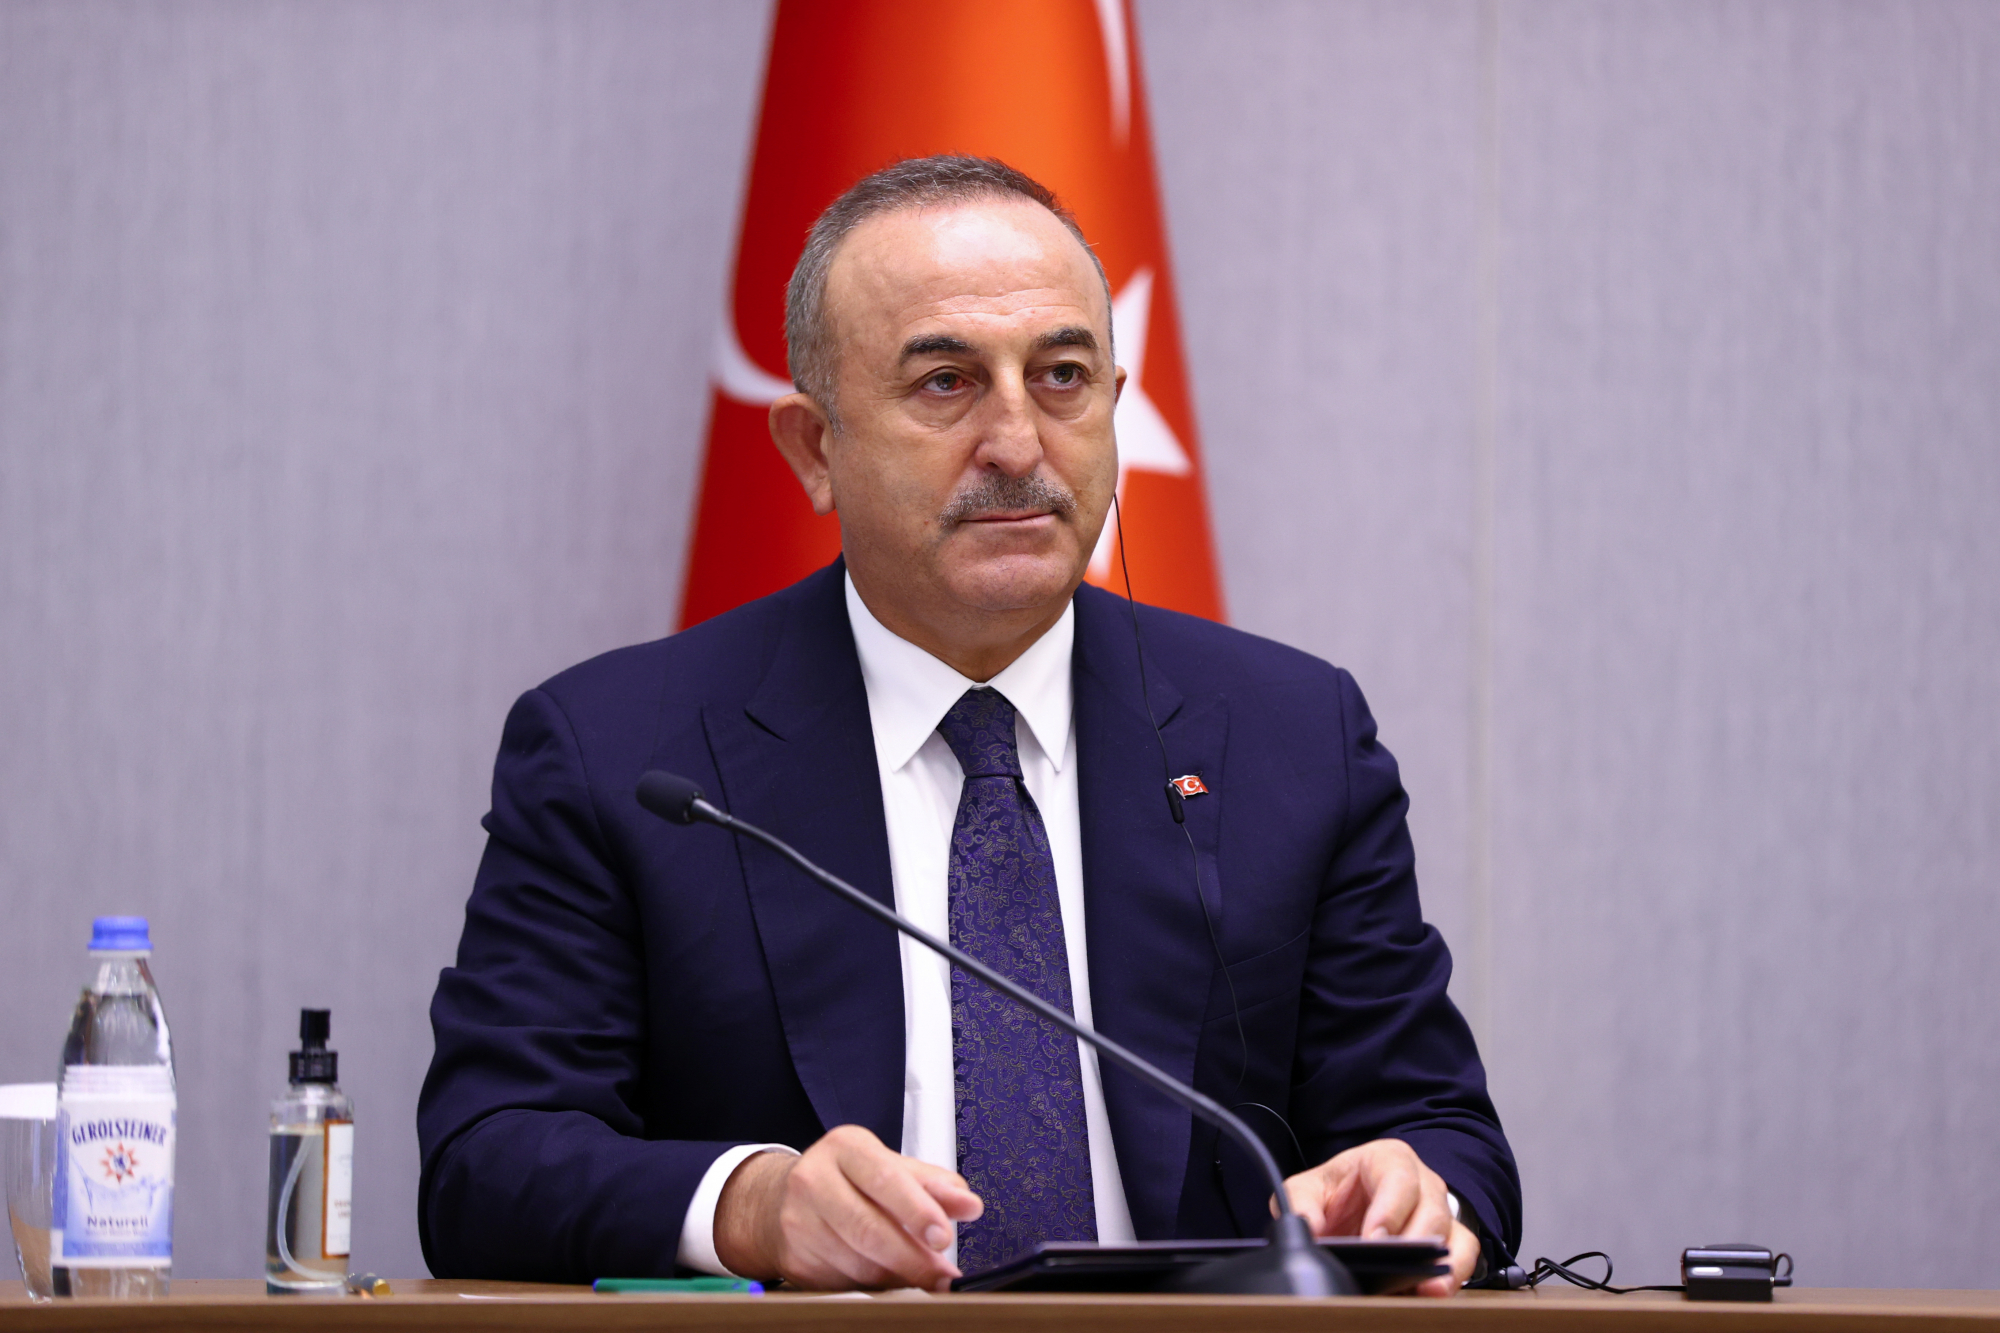 Cavusoglu: “Cyprus is our national issue” – A Federation solution is no longer appropriate